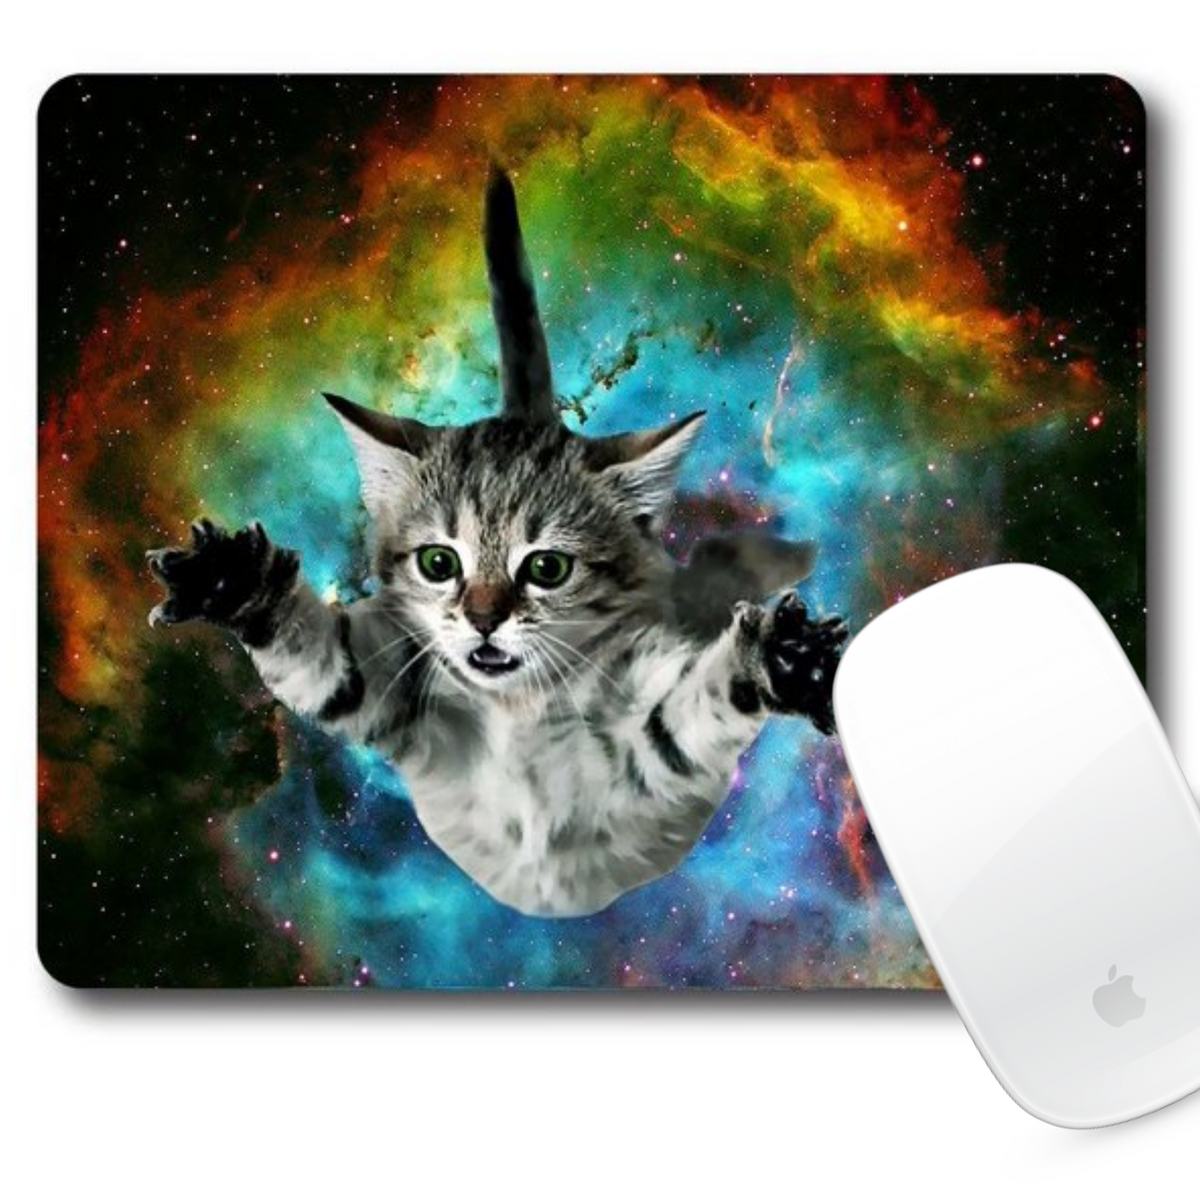 MOUSE PAD-GALAXY CAT